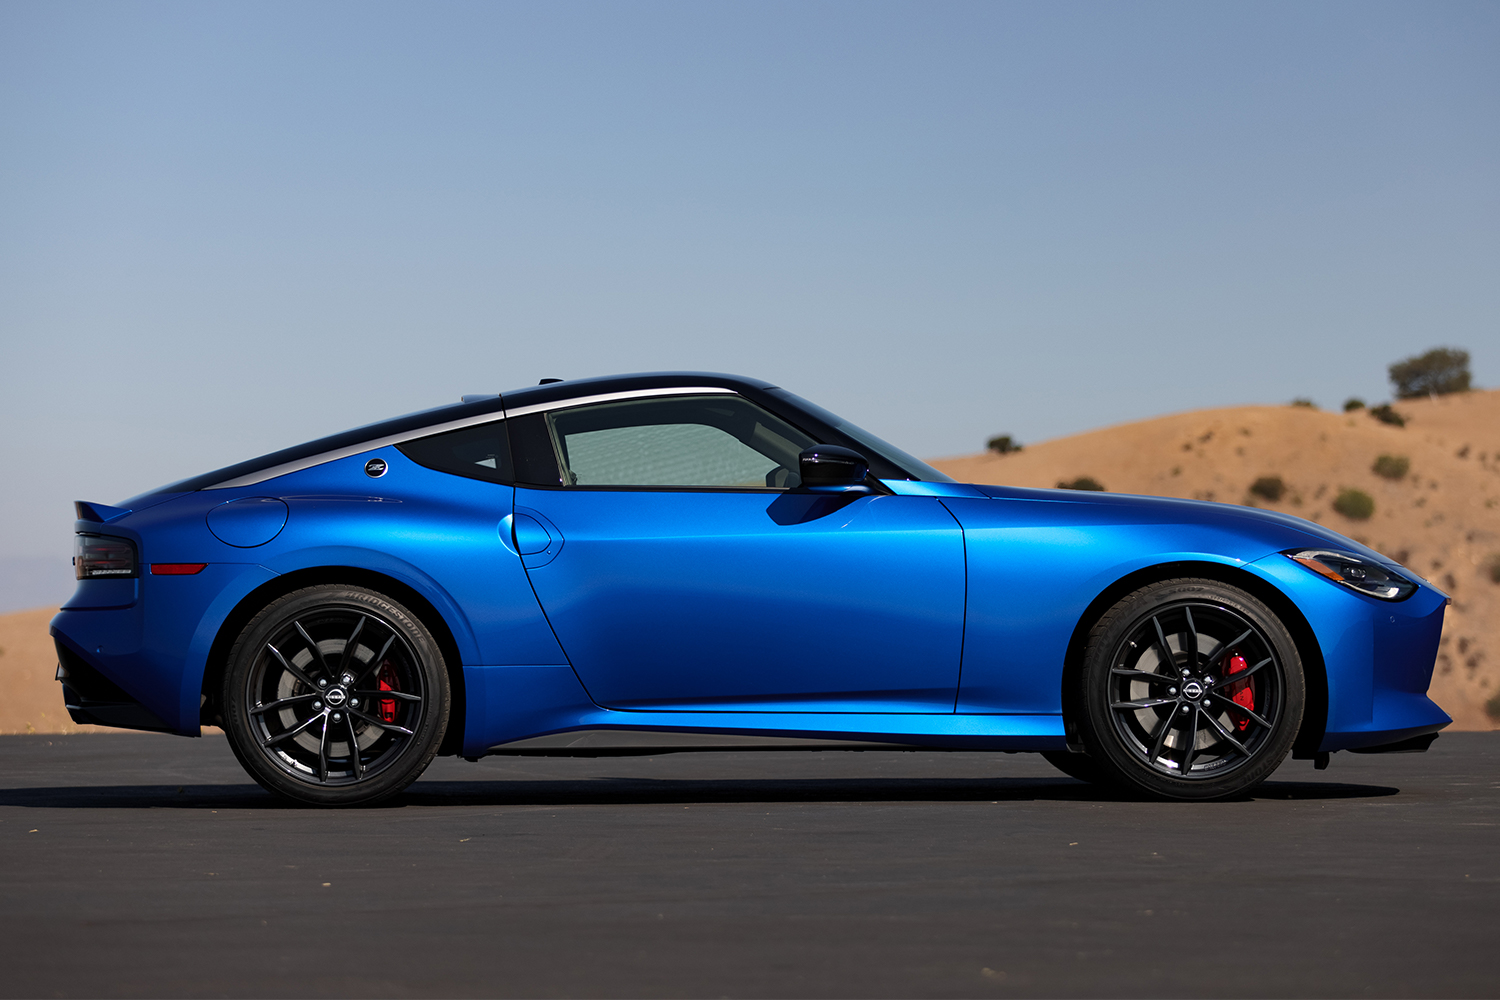 The new 2023 Nissan Z sports car, shown in the blue color in profile